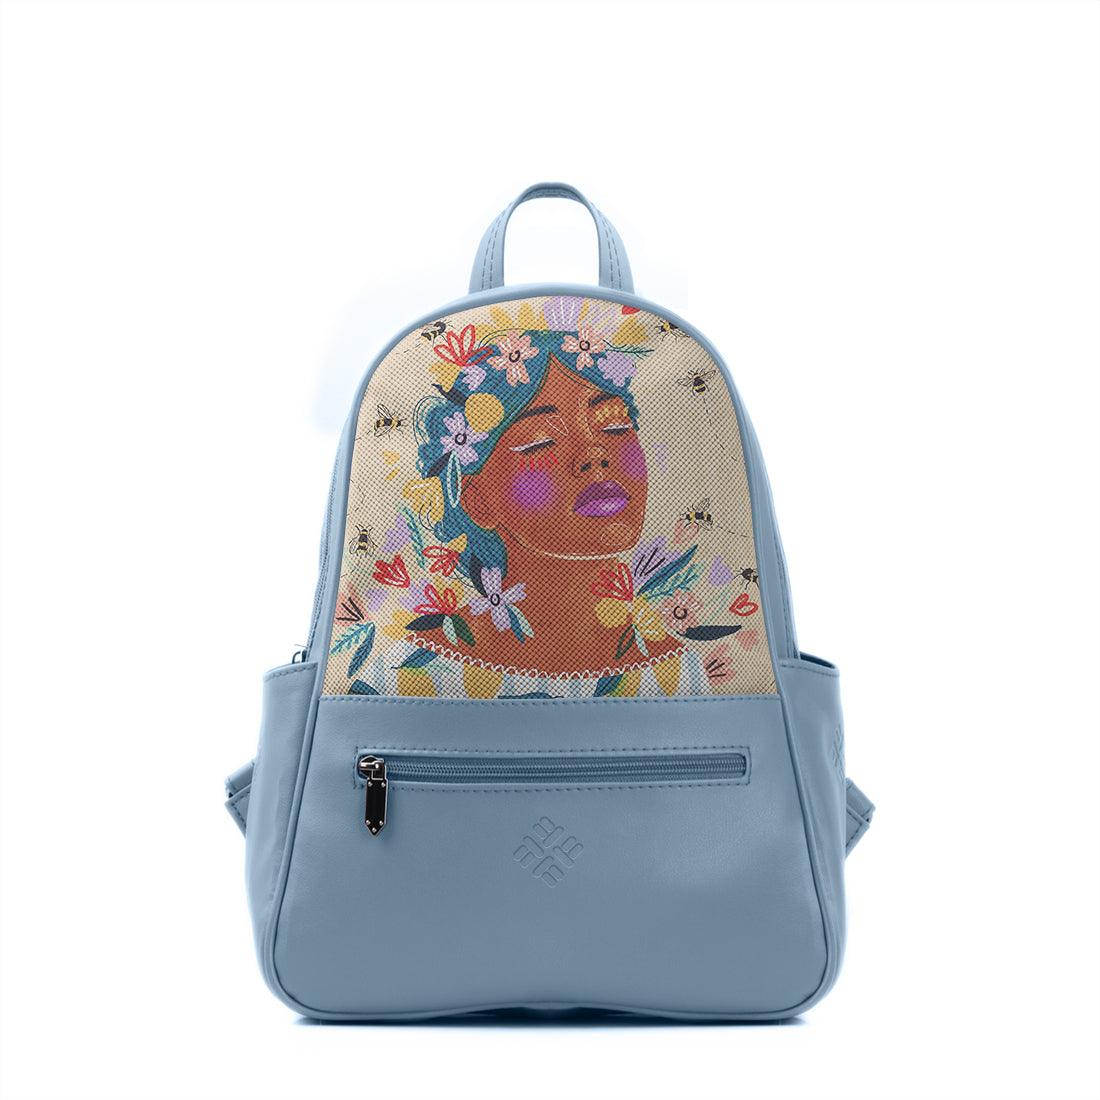 Blue Vivid Backpack Save the bees - CANVAEGYPT